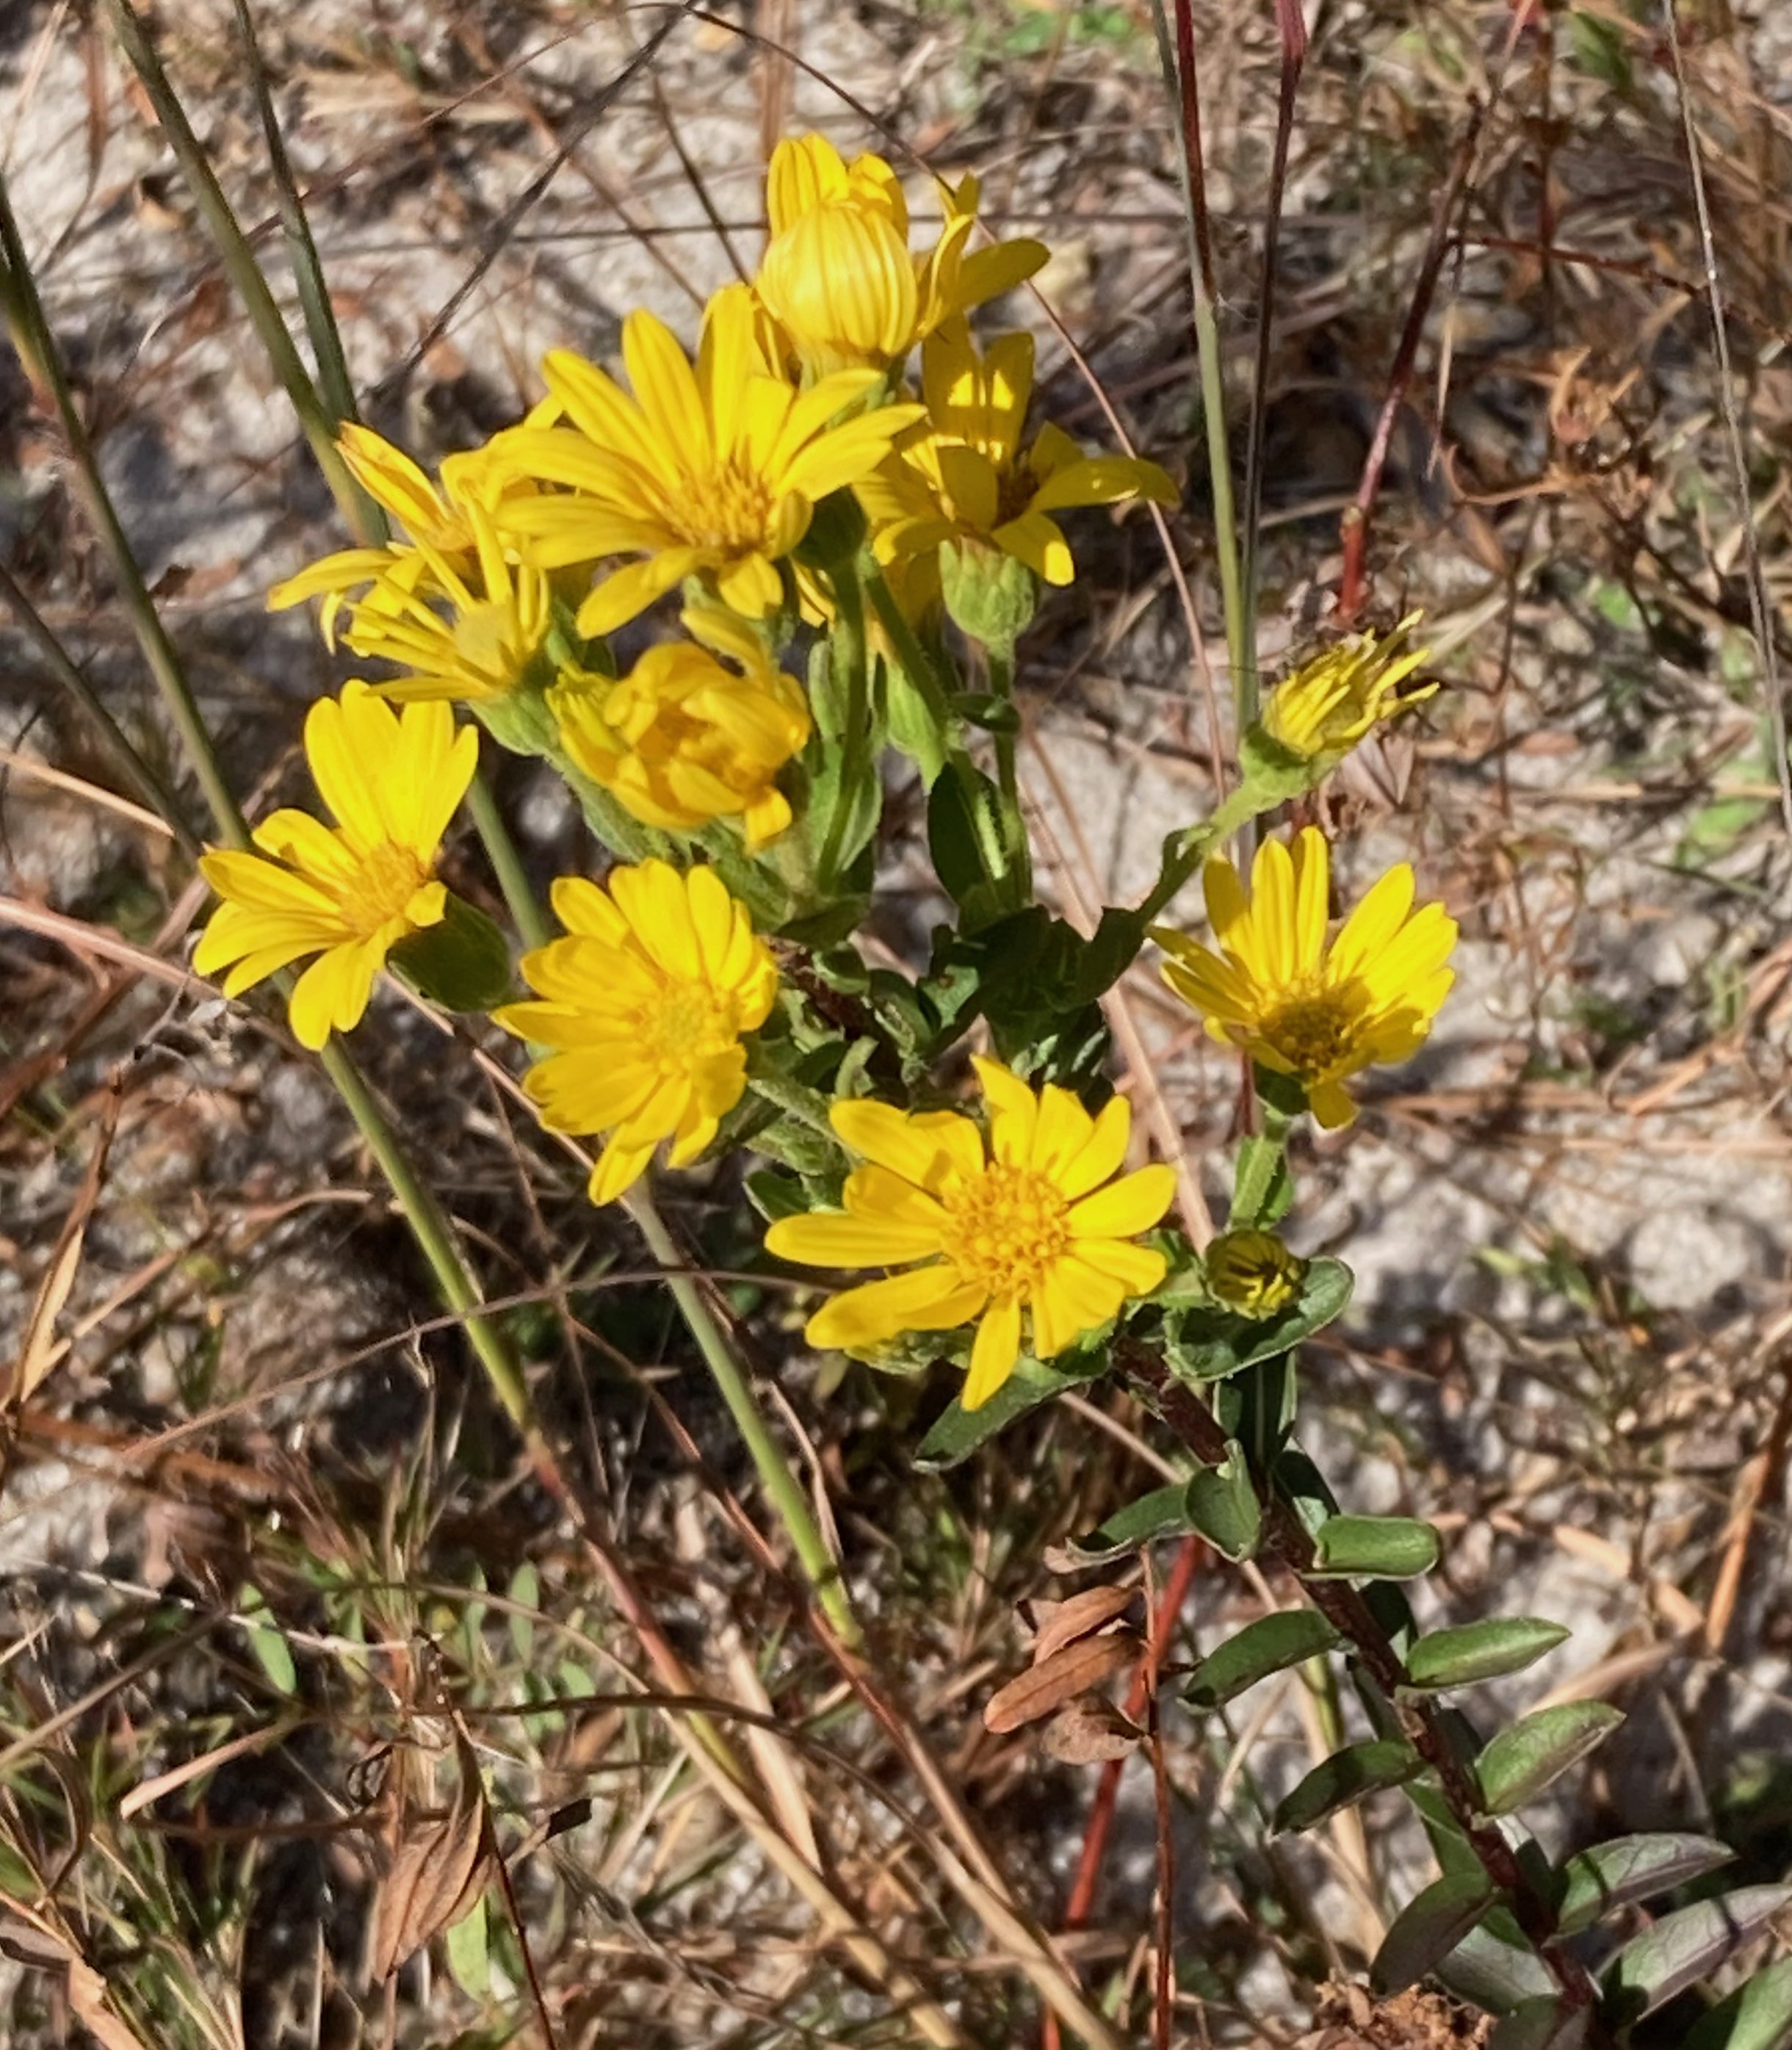 The Scientific Name is Chrysopsis mariana [= Heterotheca mariana]. You will likely hear them called Maryland Goldenaster. This picture shows the Yellow ray and disk florets. Upper leaves becoming small and sessile. of Chrysopsis mariana [= Heterotheca mariana]